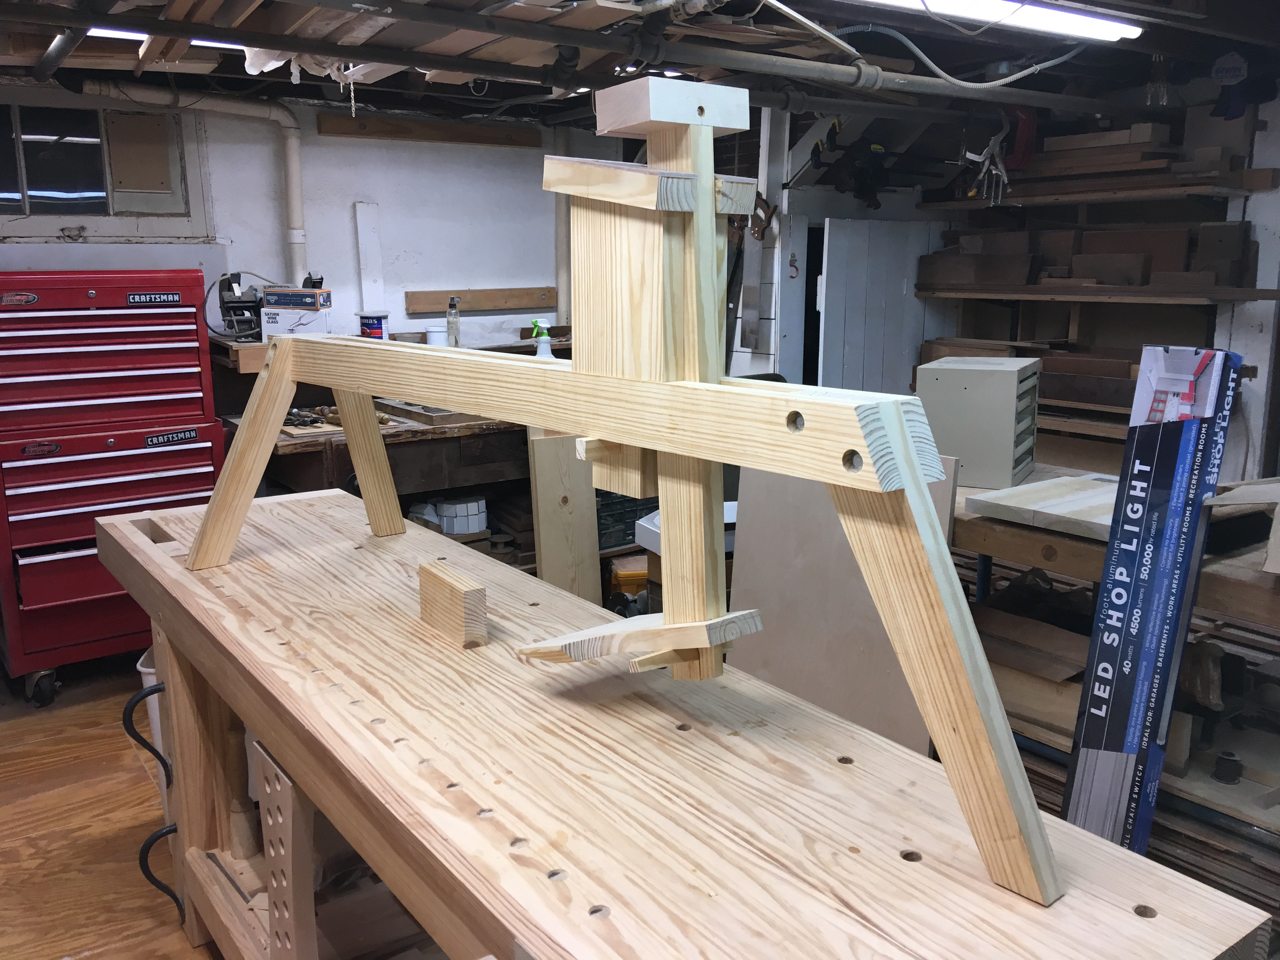 Nearly complete shave horse